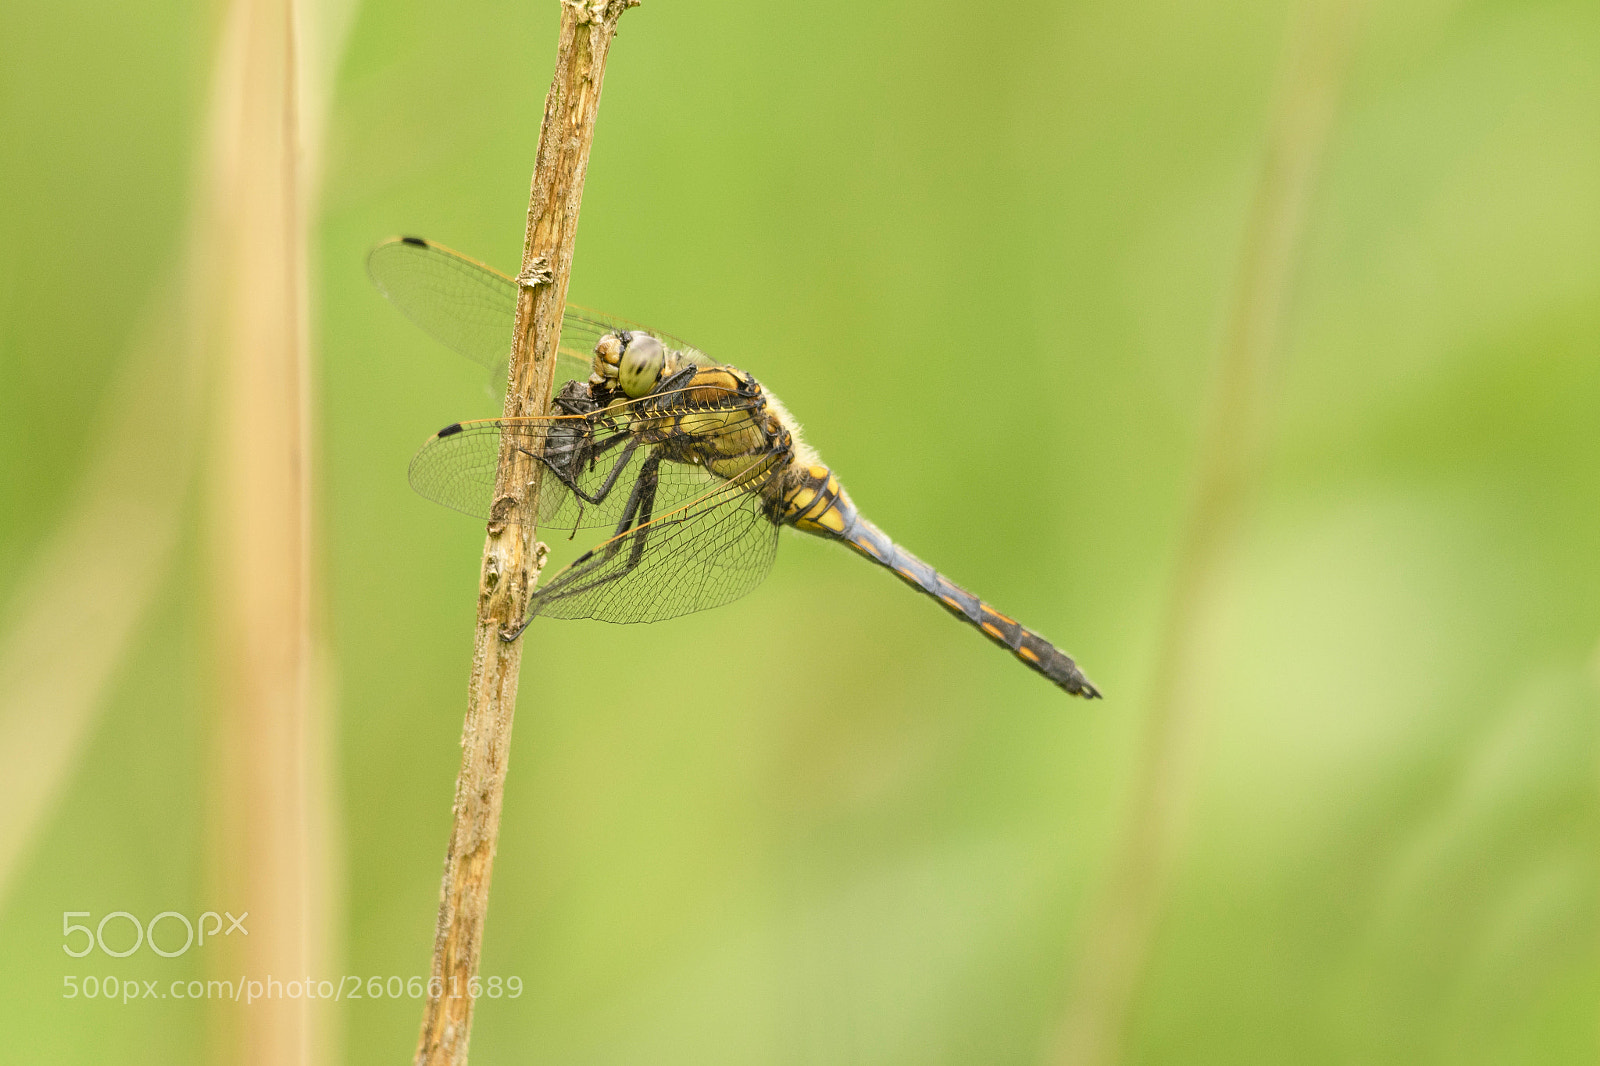 Pentax K-3 sample photo. Eating dragonfly photography